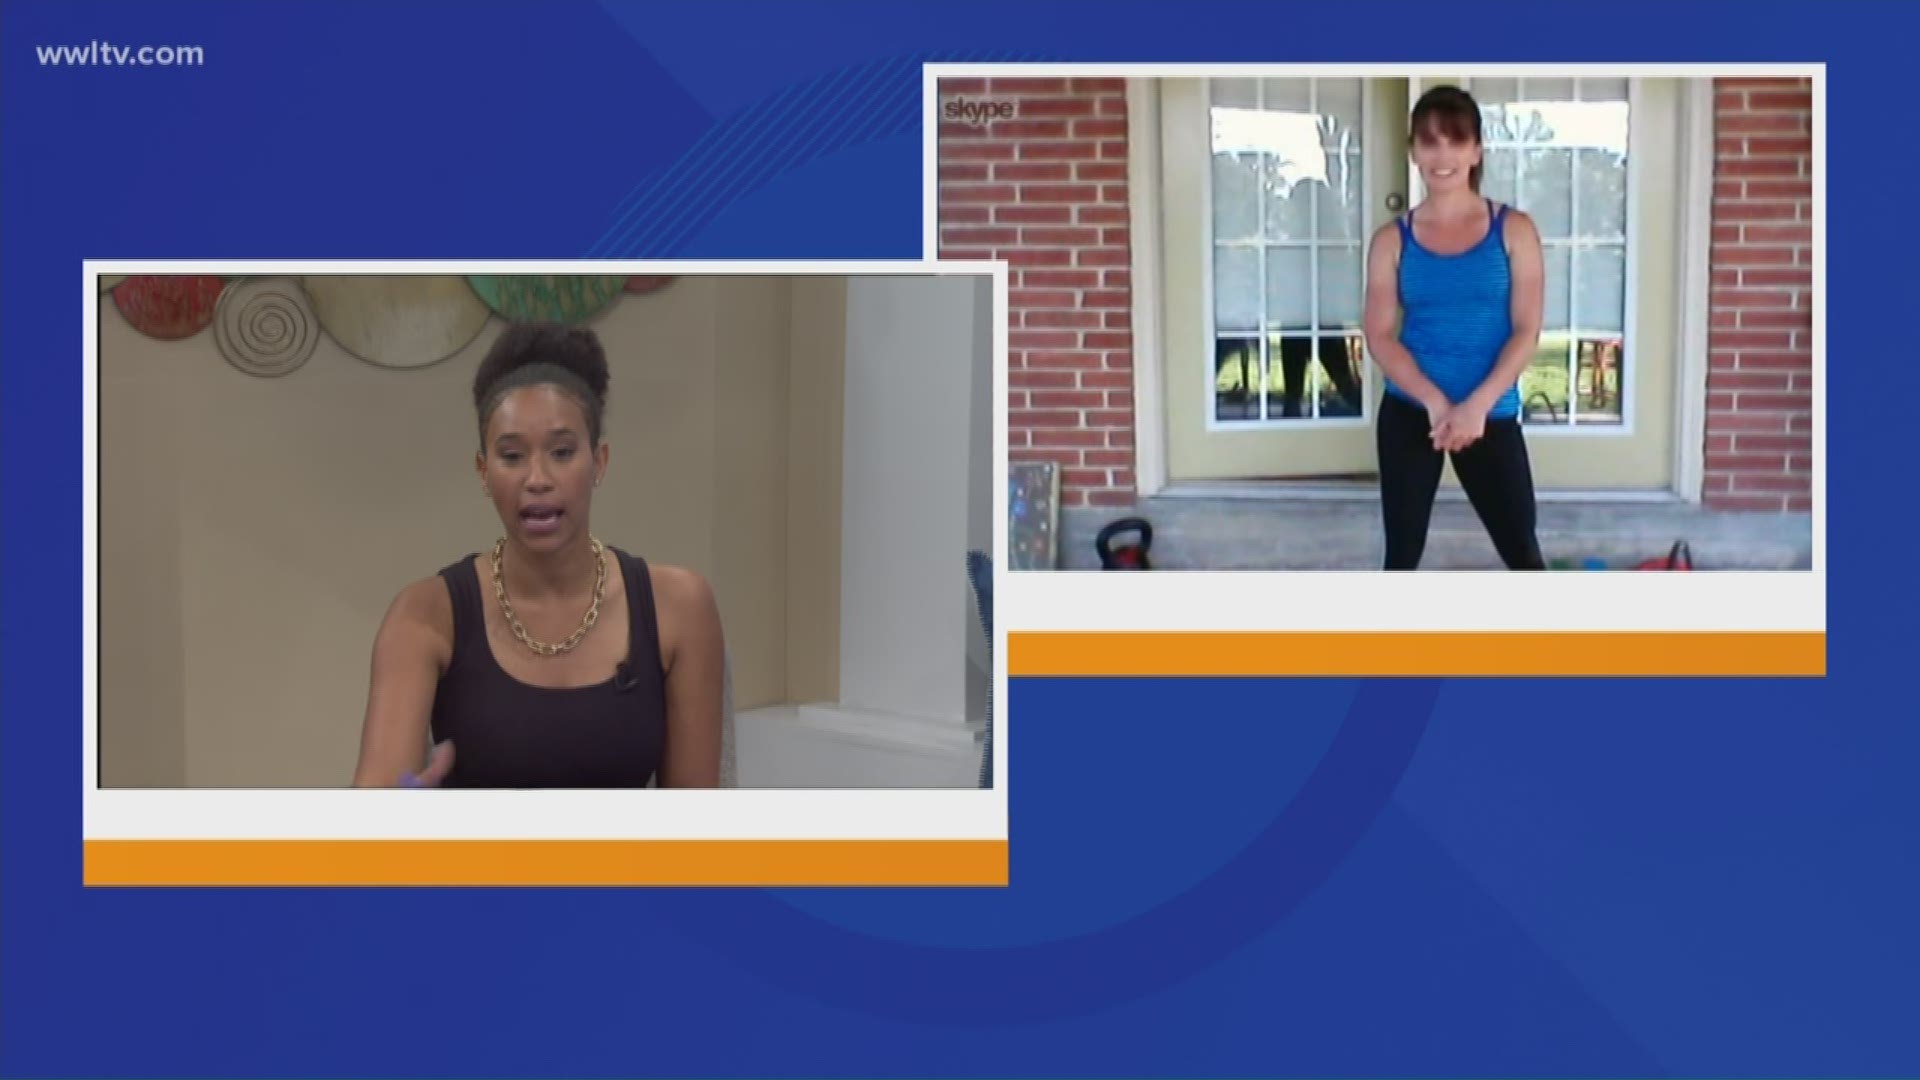 Trainer Wendy Cecilian Welch has advice for working out while staying at home.